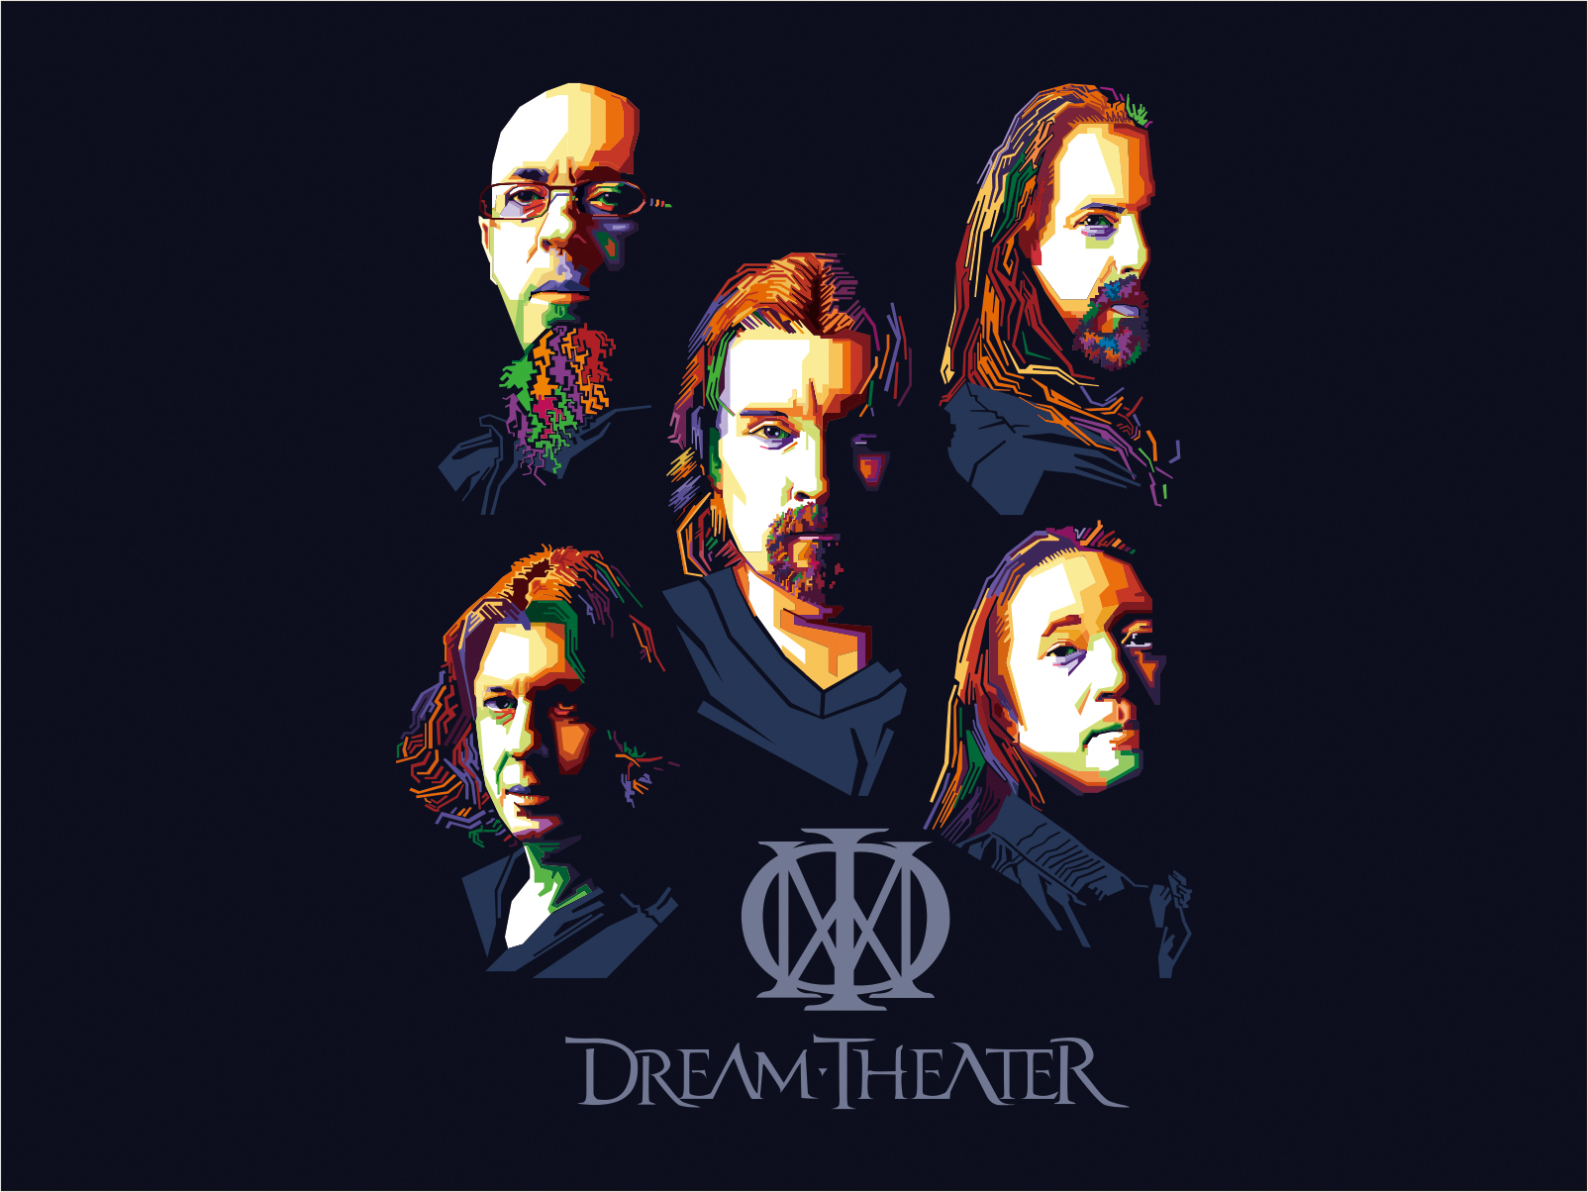 Dream Theater in Vector Art by Afdesign_studio on Dribbble